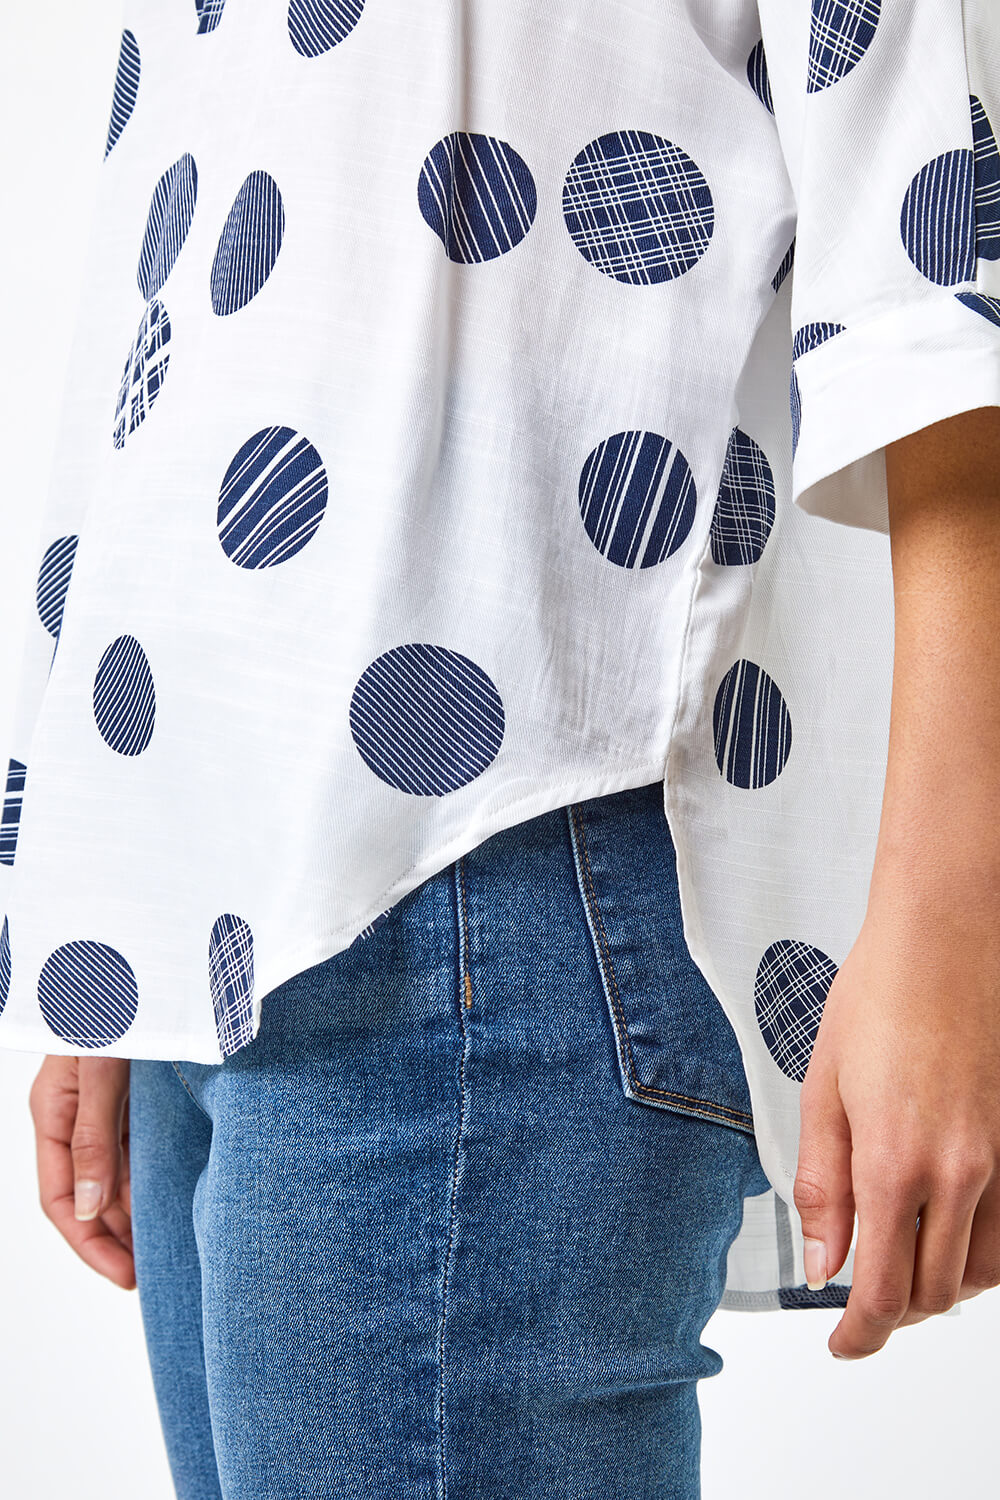 Ivory  Abstract Spot Print Top, Image 6 of 6